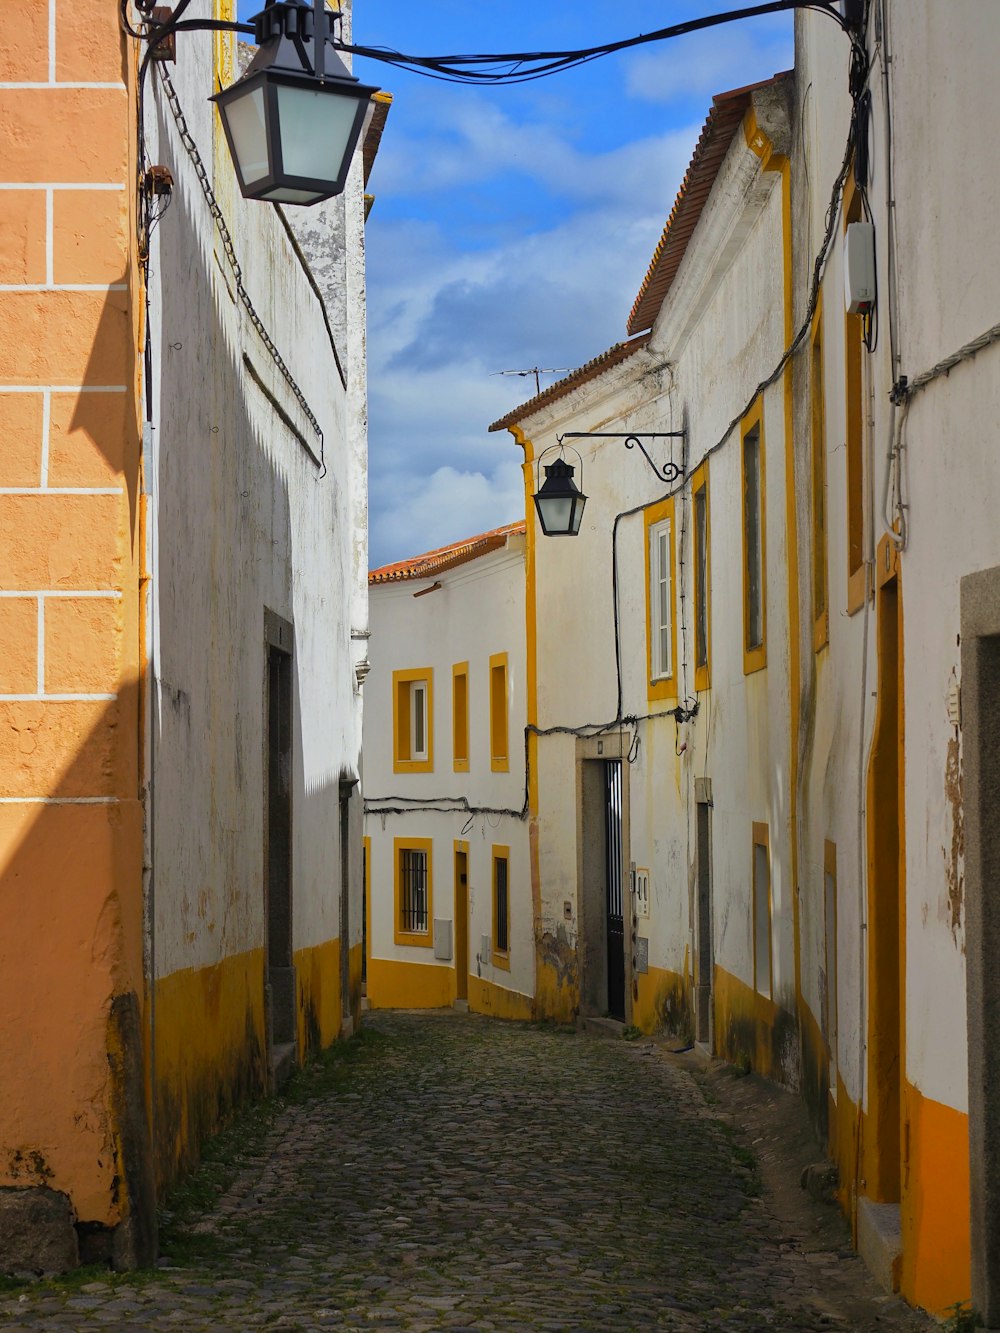 a narrow alley way with a lamp on the side